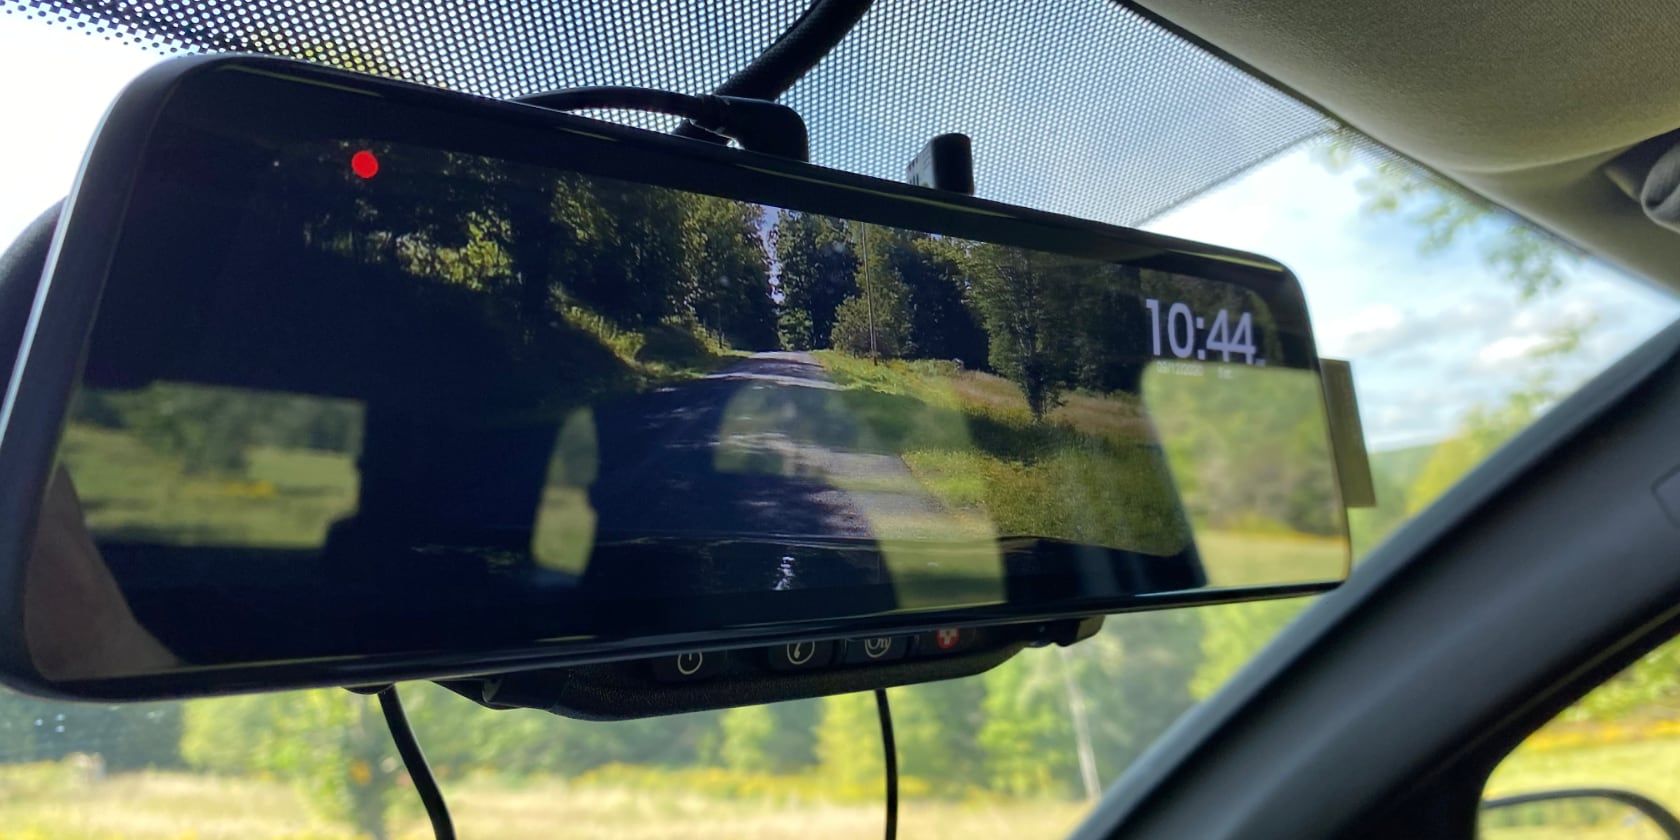 Front view of the dash cam